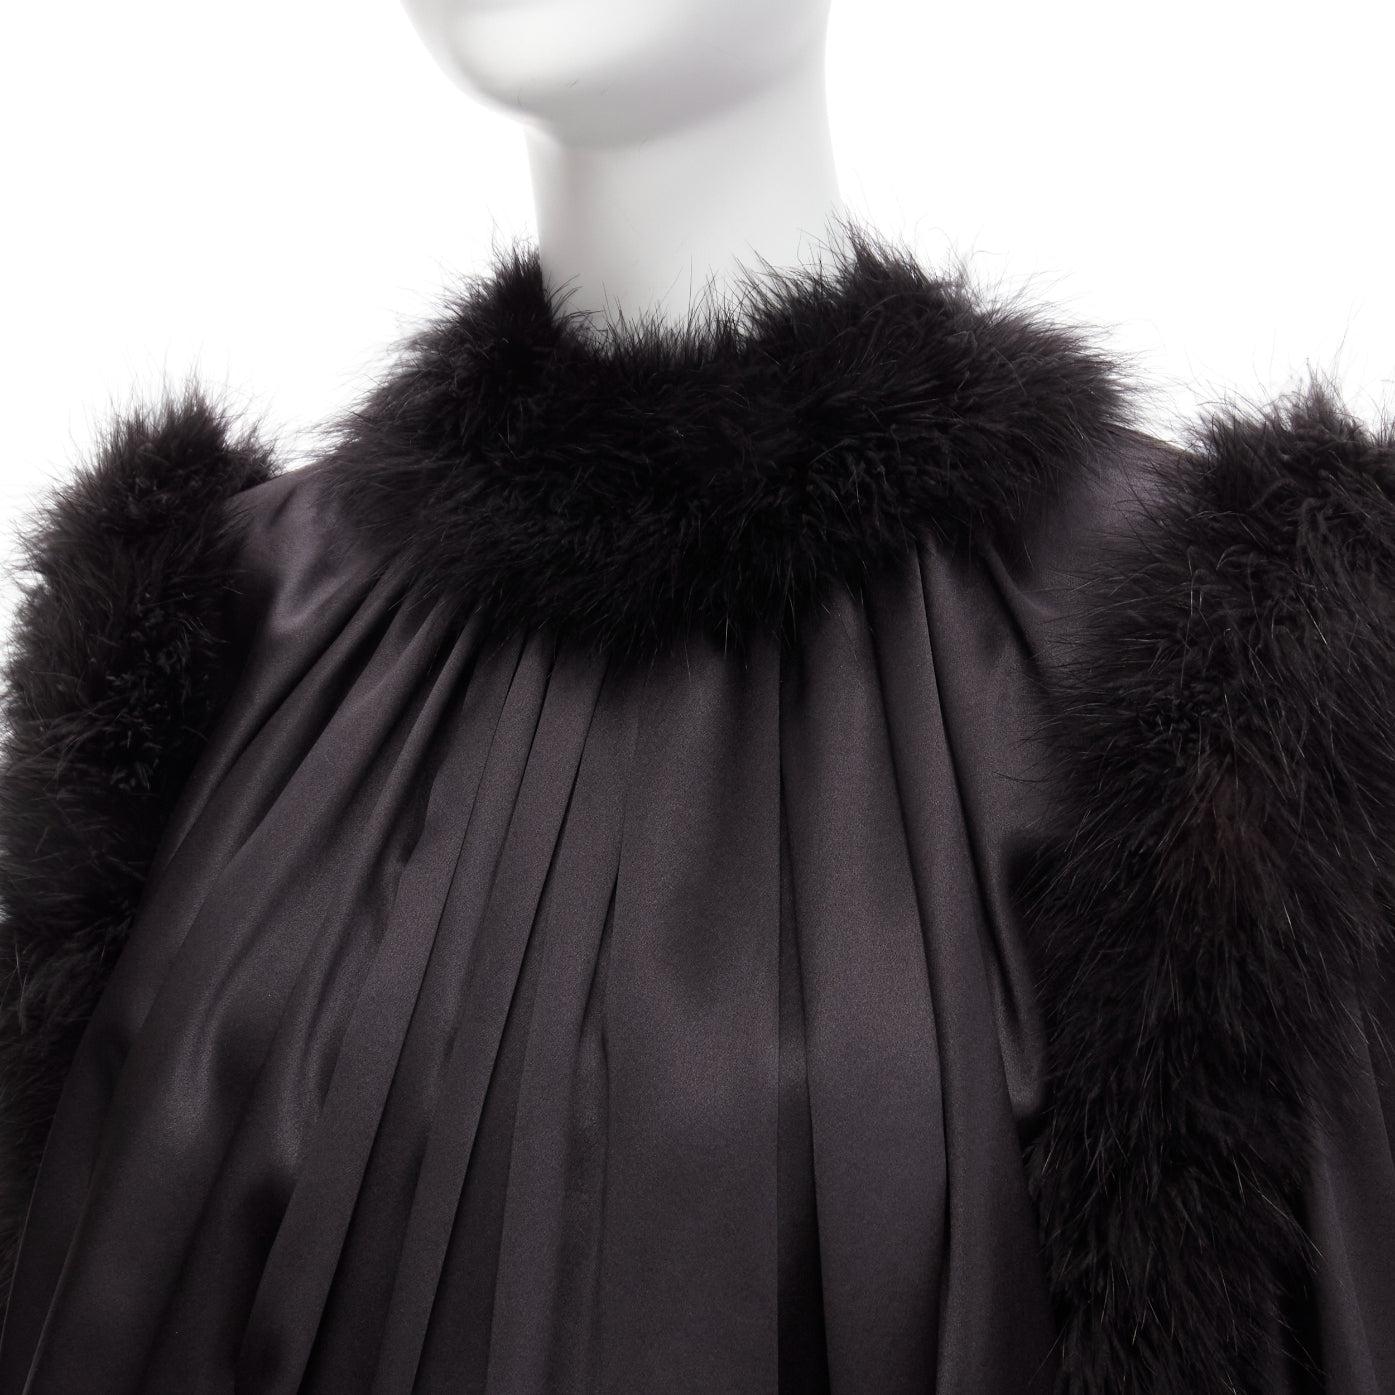 SAINT LAURENT 2021 Runway black feather trim 100% silk wide layered mini dress FR40 L
Reference: TGAS/D00747
Brand: Saint Laurent
Designer: Anthony Vaccarello
Collection: 2021 Resort - Runway
As seen on: Talia Ryder
Material: Silk, Feather
Color: